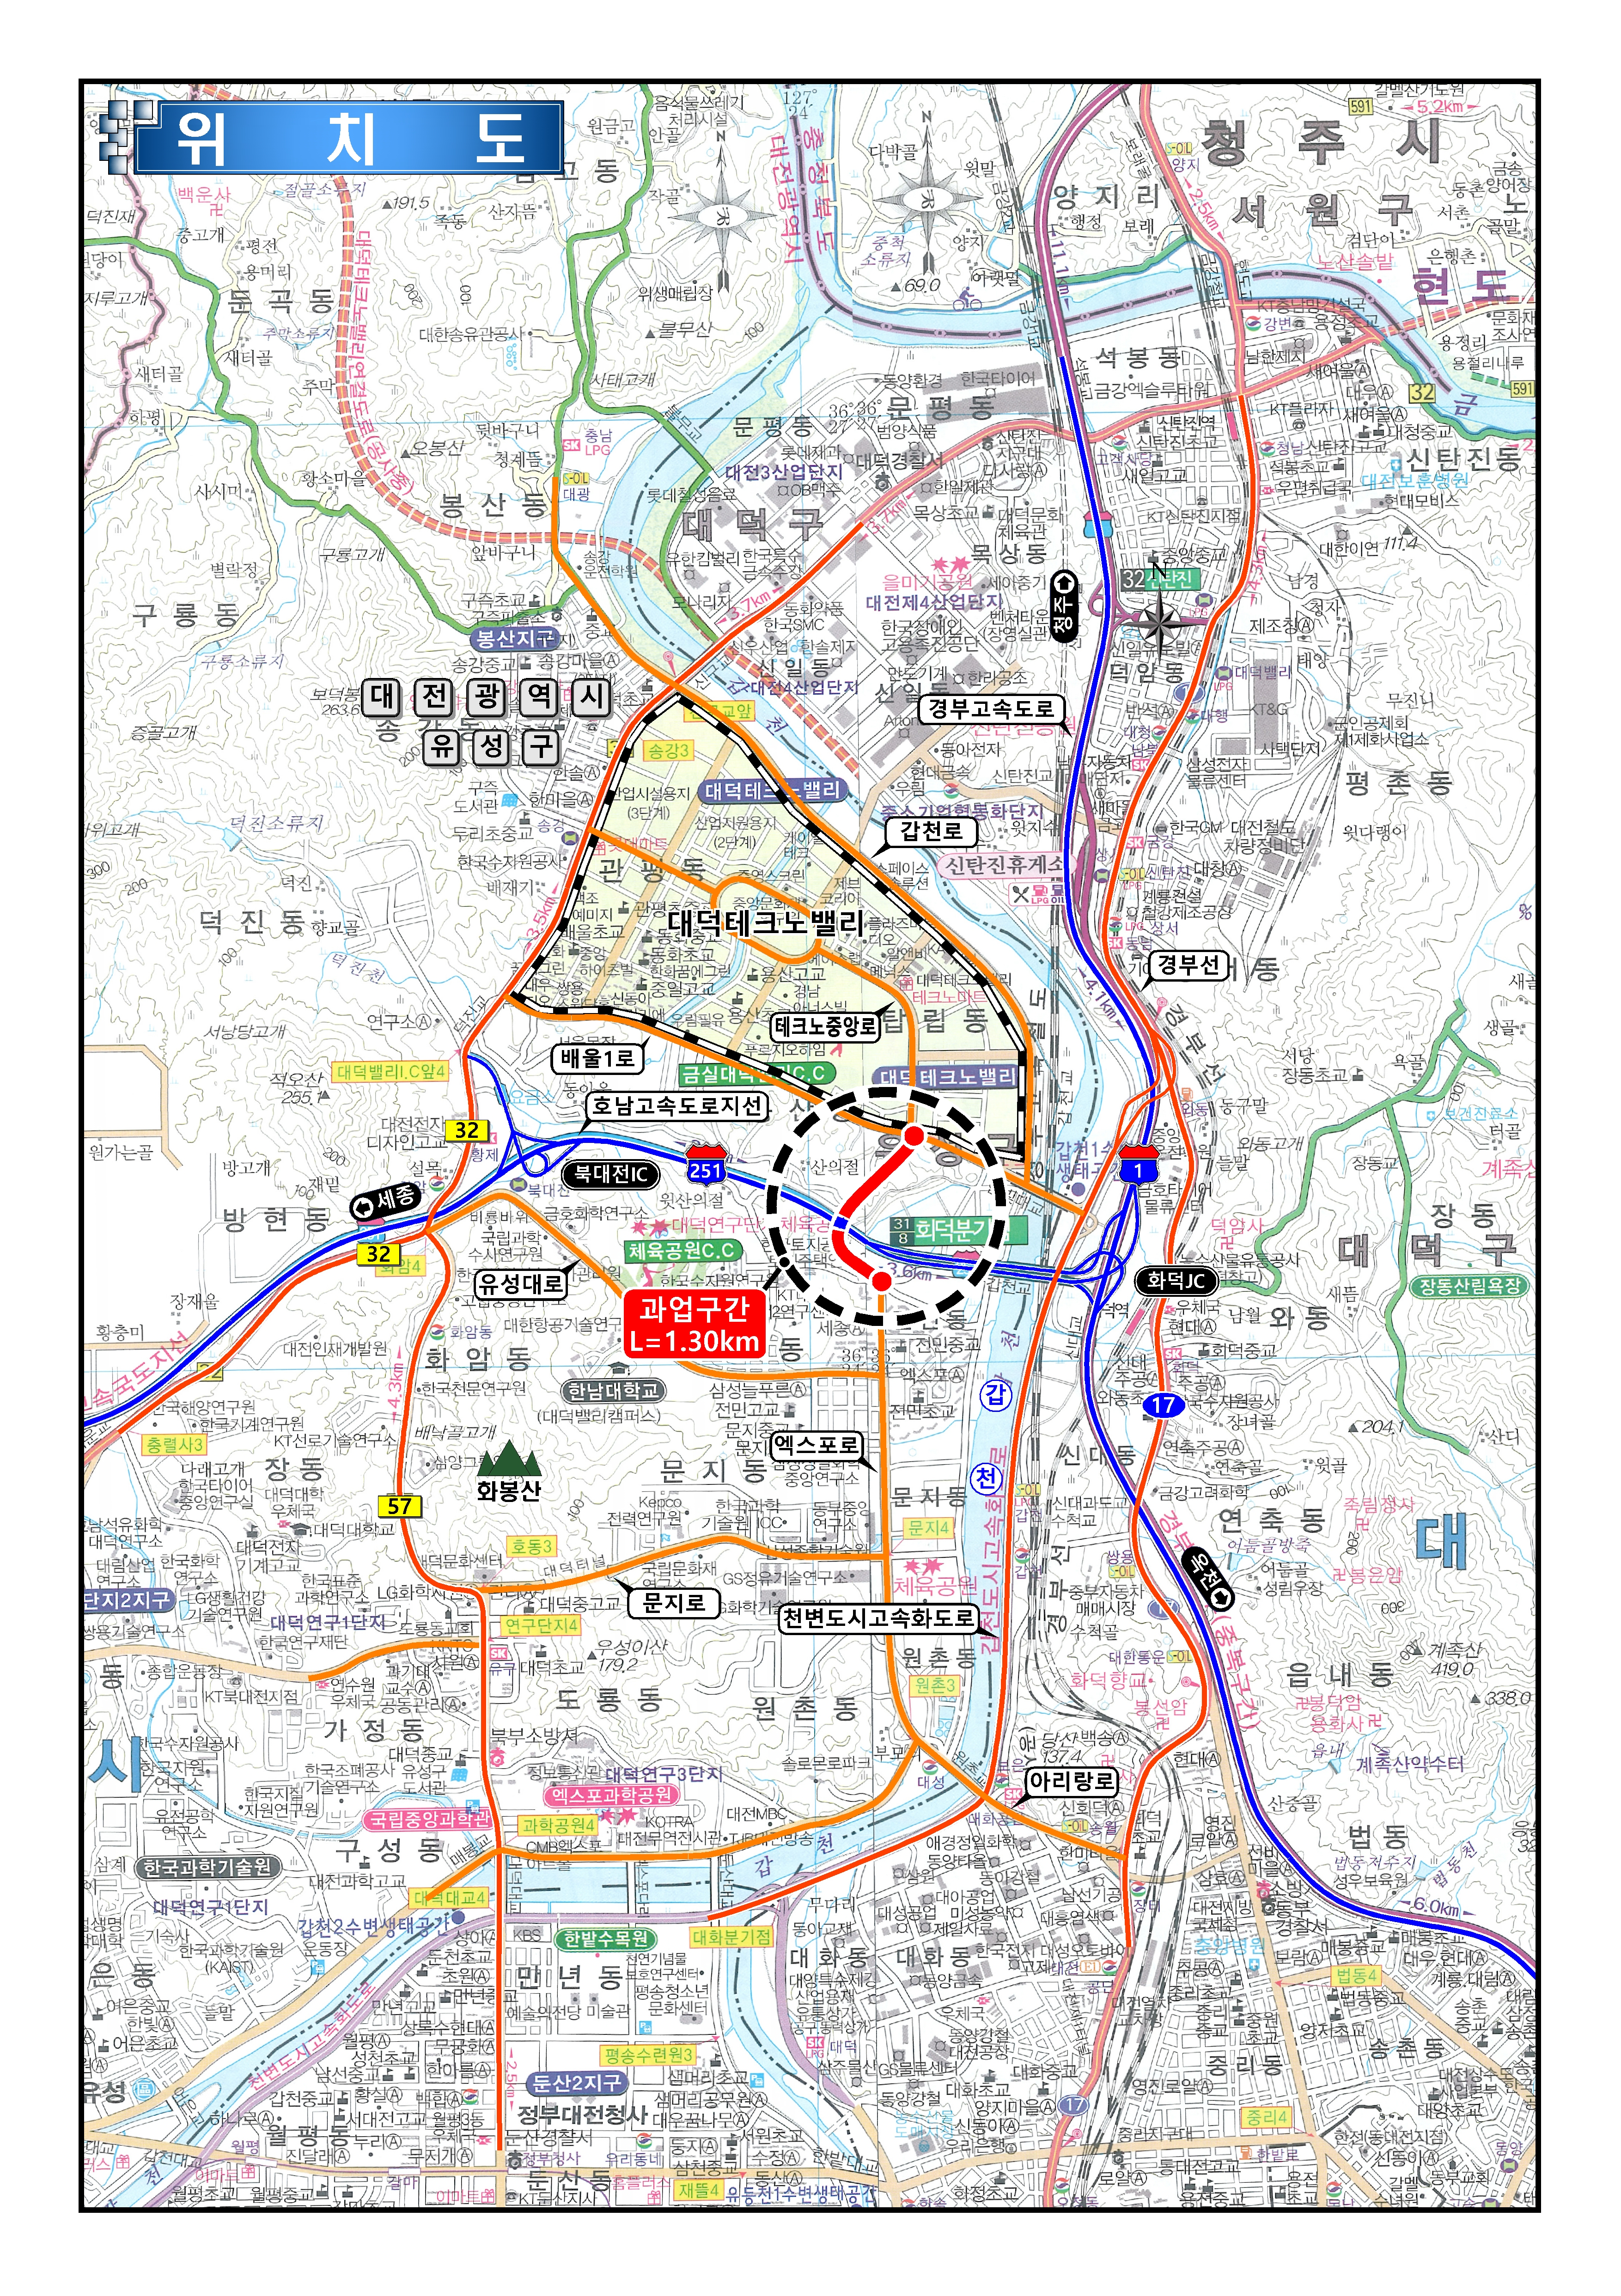 Preliminary and detailed engineering design for road expansion between Cheongbyeoksan Park Intersection and Expo Apartment